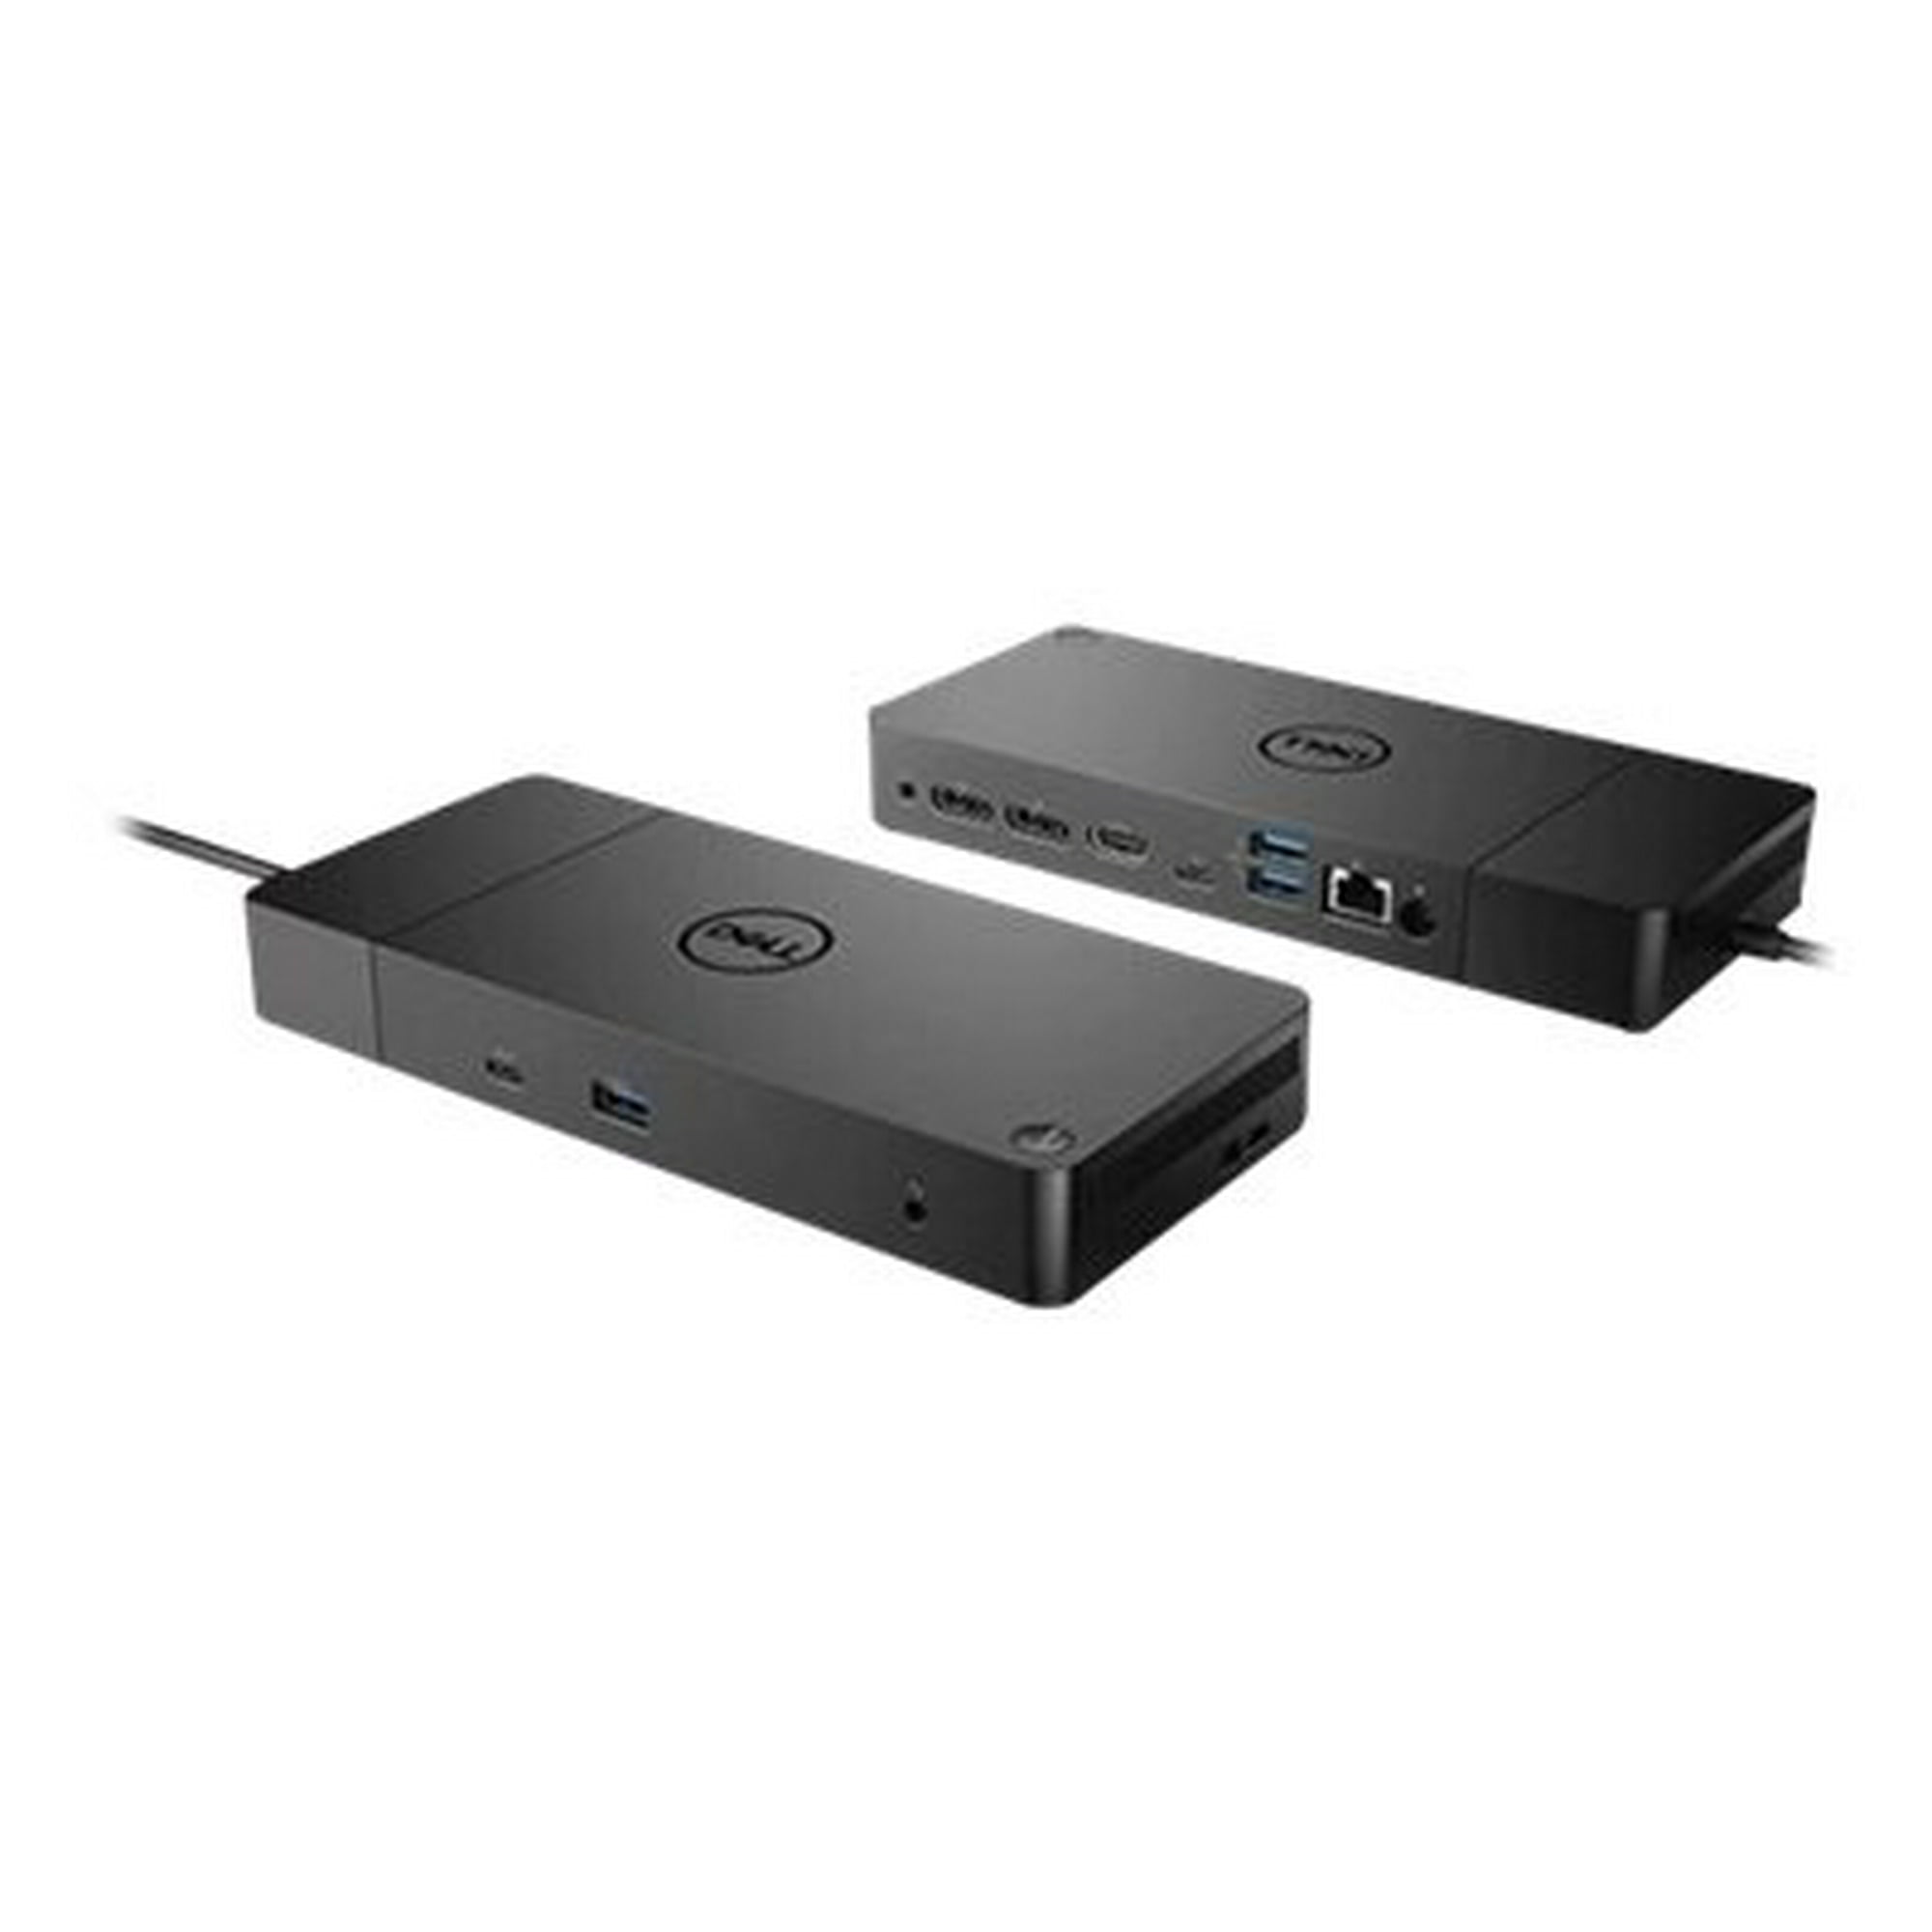 Dell Thunderbolt Dock WD19TB - Docking station - USB-C / Thunderbolt 3 -  HDMI, DP, Thunderbolt - GigE - 180 Watt - for Dell Latitude 3390, 3400,  3490, 3590, 5280, 5289, 5290 (2-in-1), 5300 (2-in-1), 5400, 542X, 5480,  549X, 5500, 5580, 559X, 7280, 7285 ...